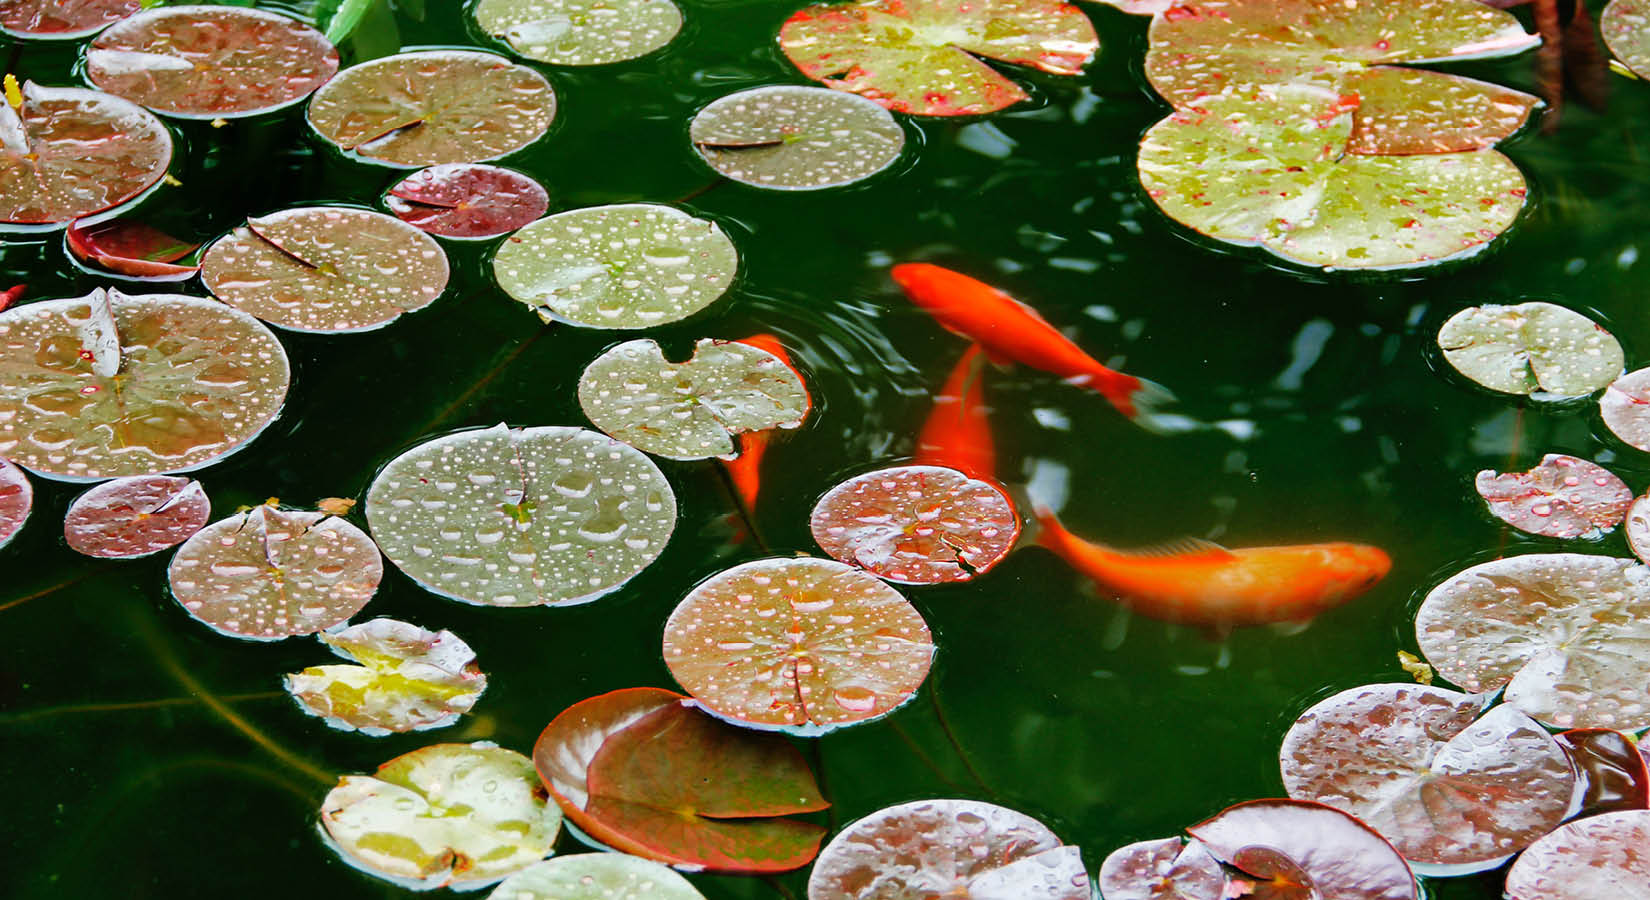 World Aquatic Animal Day 2023: 7 fun facts about aquatic life in ponds